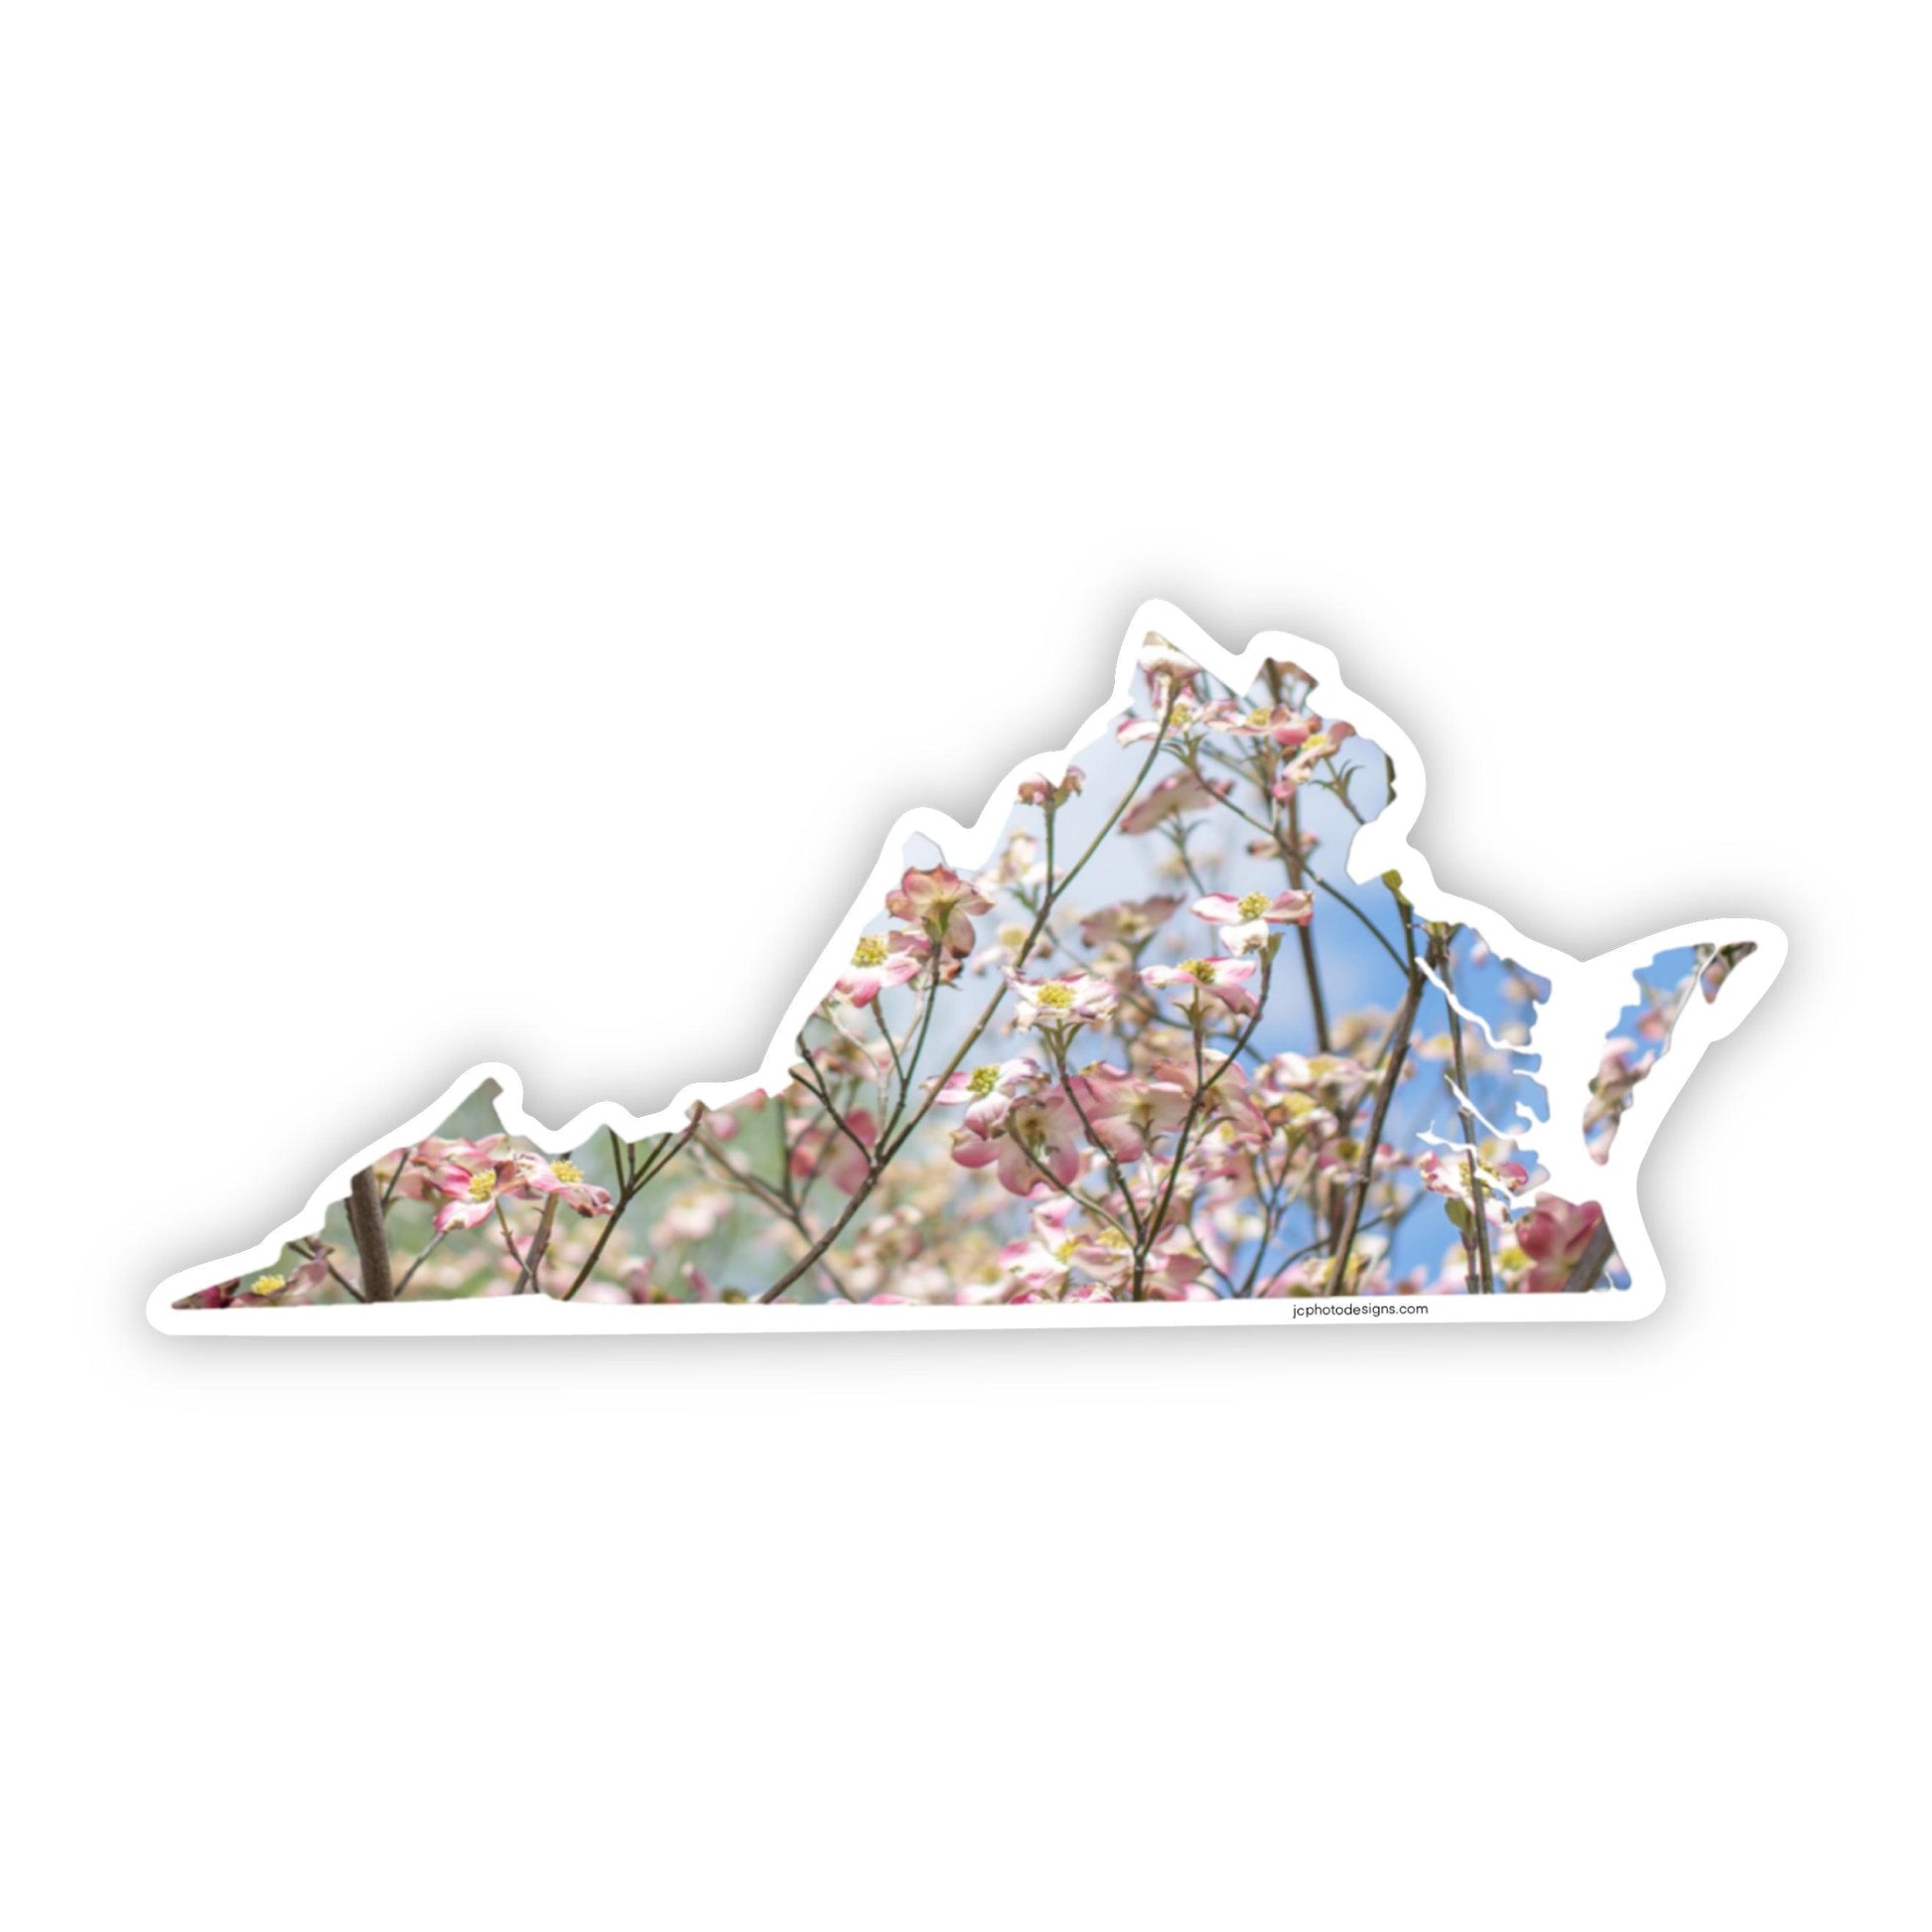 Virginia Flowering Dogwood State-Shaped Sticker - Scenic Nature Decal - JC Designs